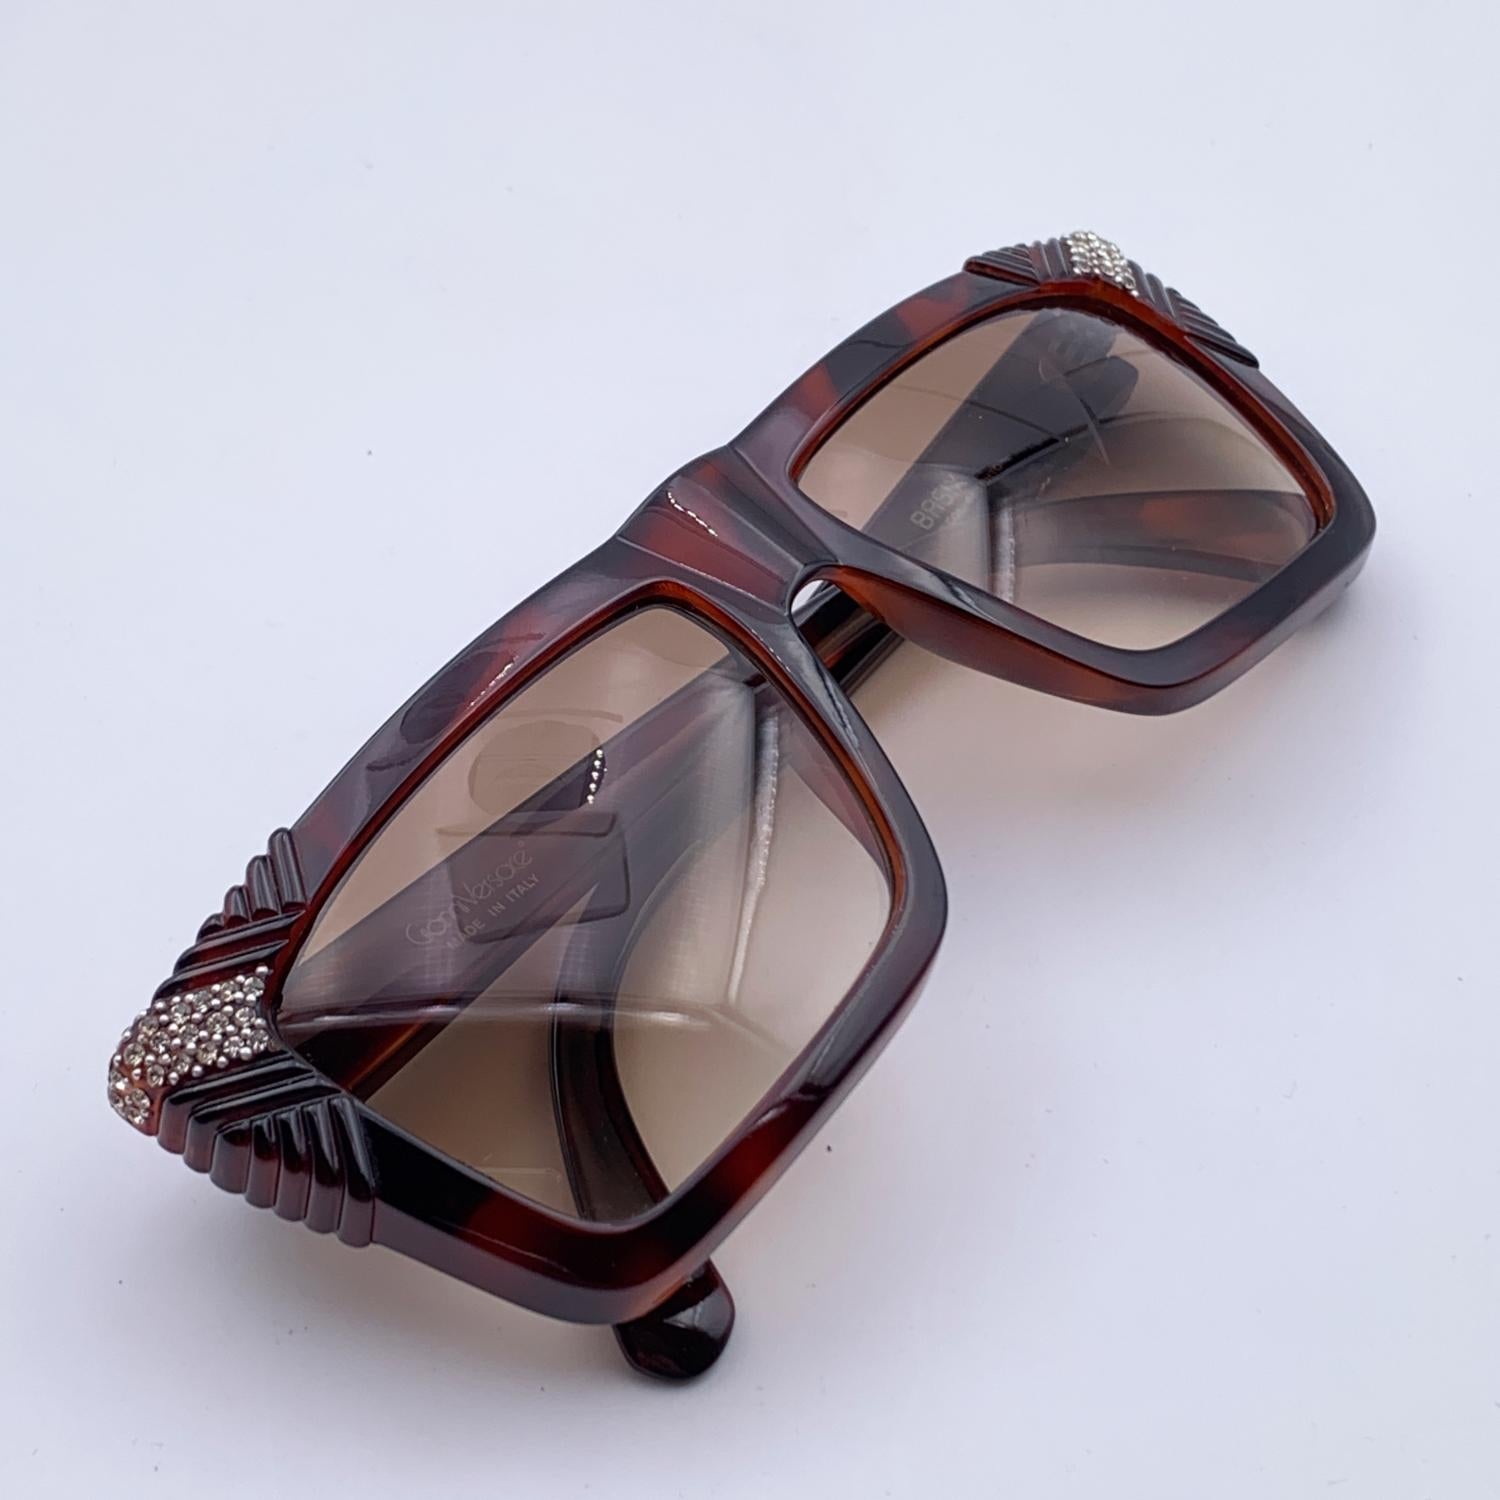 Brown, rectangular-shaped vintage sunglasses Mod. Basix 812 Col.688 by Gianni Versace. Iconic 90s sunglasses with rhinestones detailing on corners. Made in Italy. Original 100% Total UVA UVB protection original gradient brown